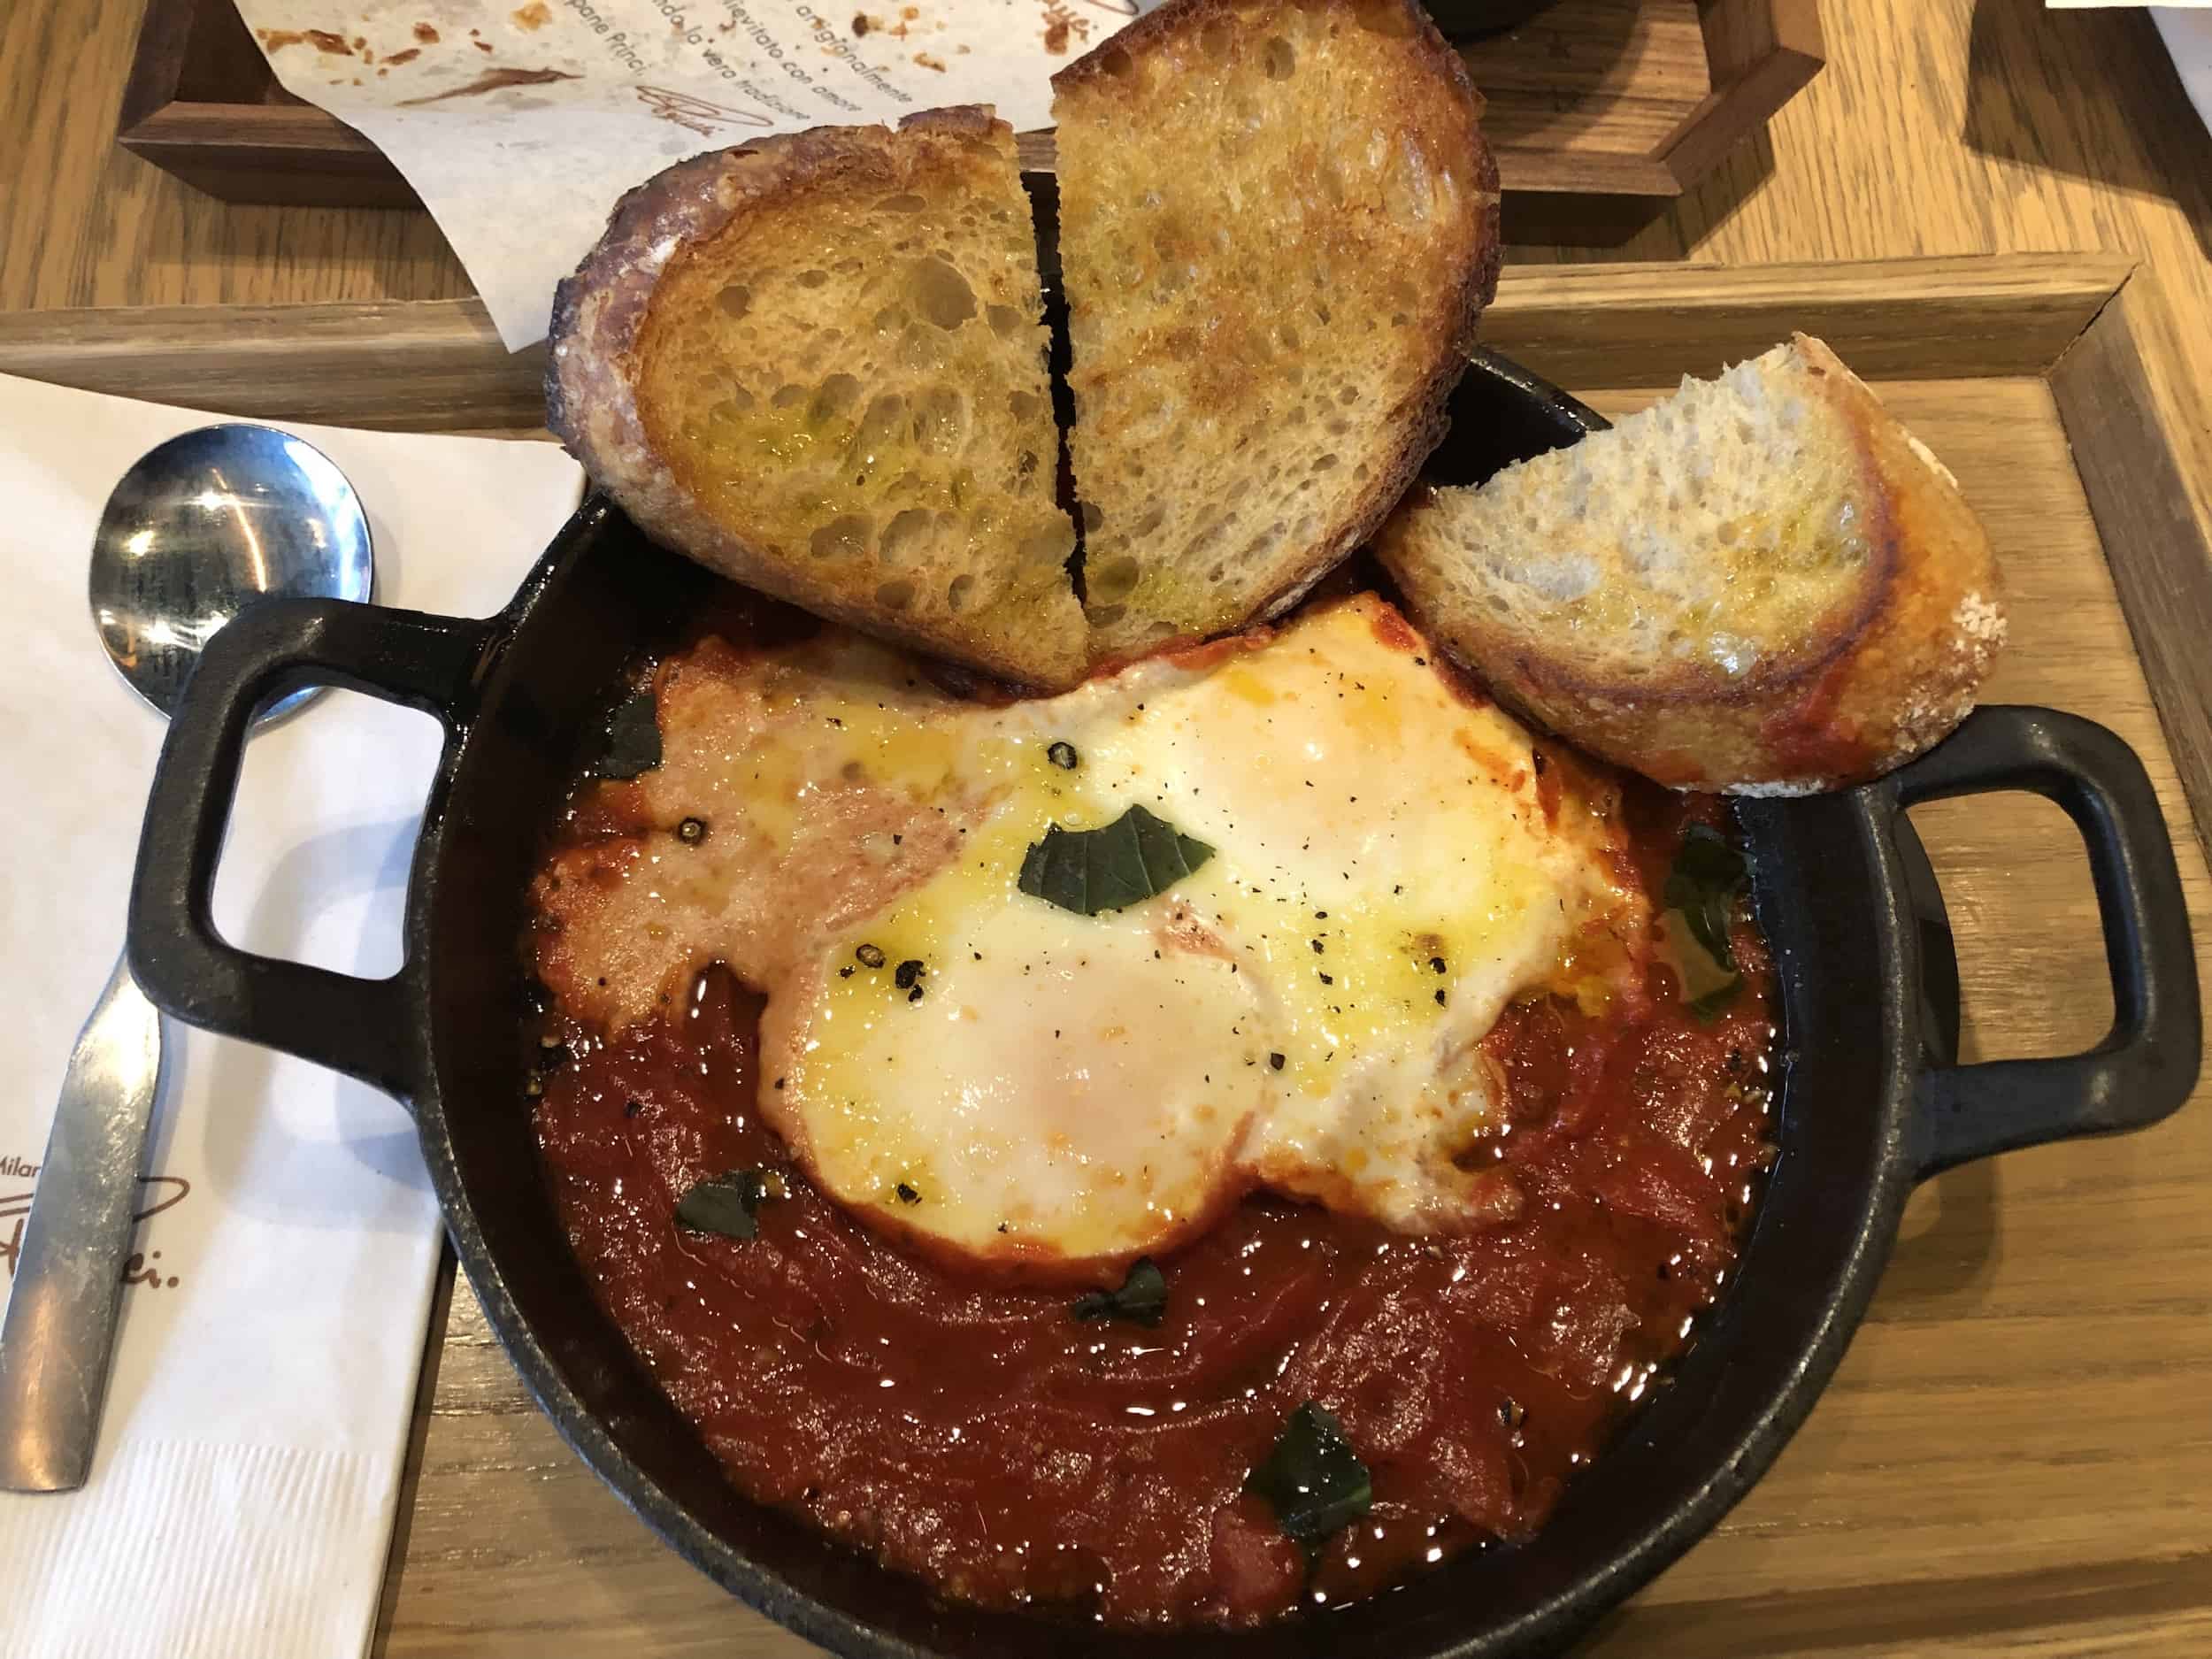 Eggs in purgatory at Starbucks Reserve Roastery on the Magnificent Mile of Chicago, Illinois